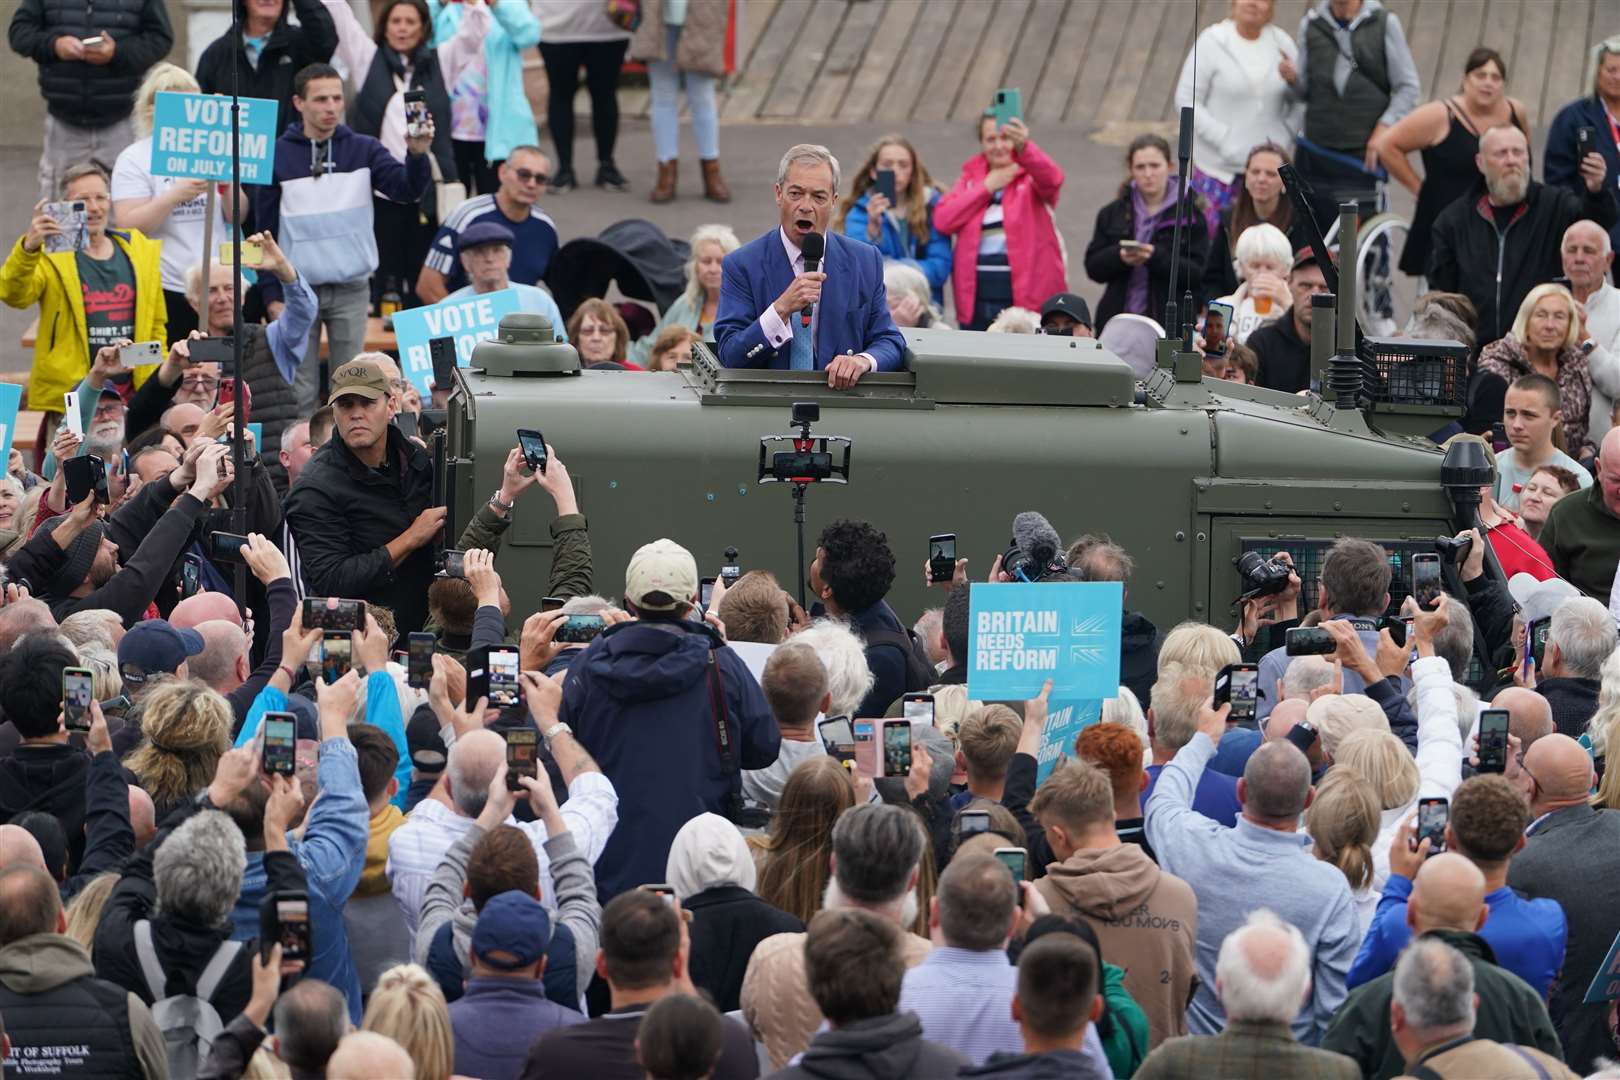 Reform UK leader Nigel Farage gives a speech to supporters on Clacton Pier in Essex, while on the General Election campaign trail (Lucy North/PA)